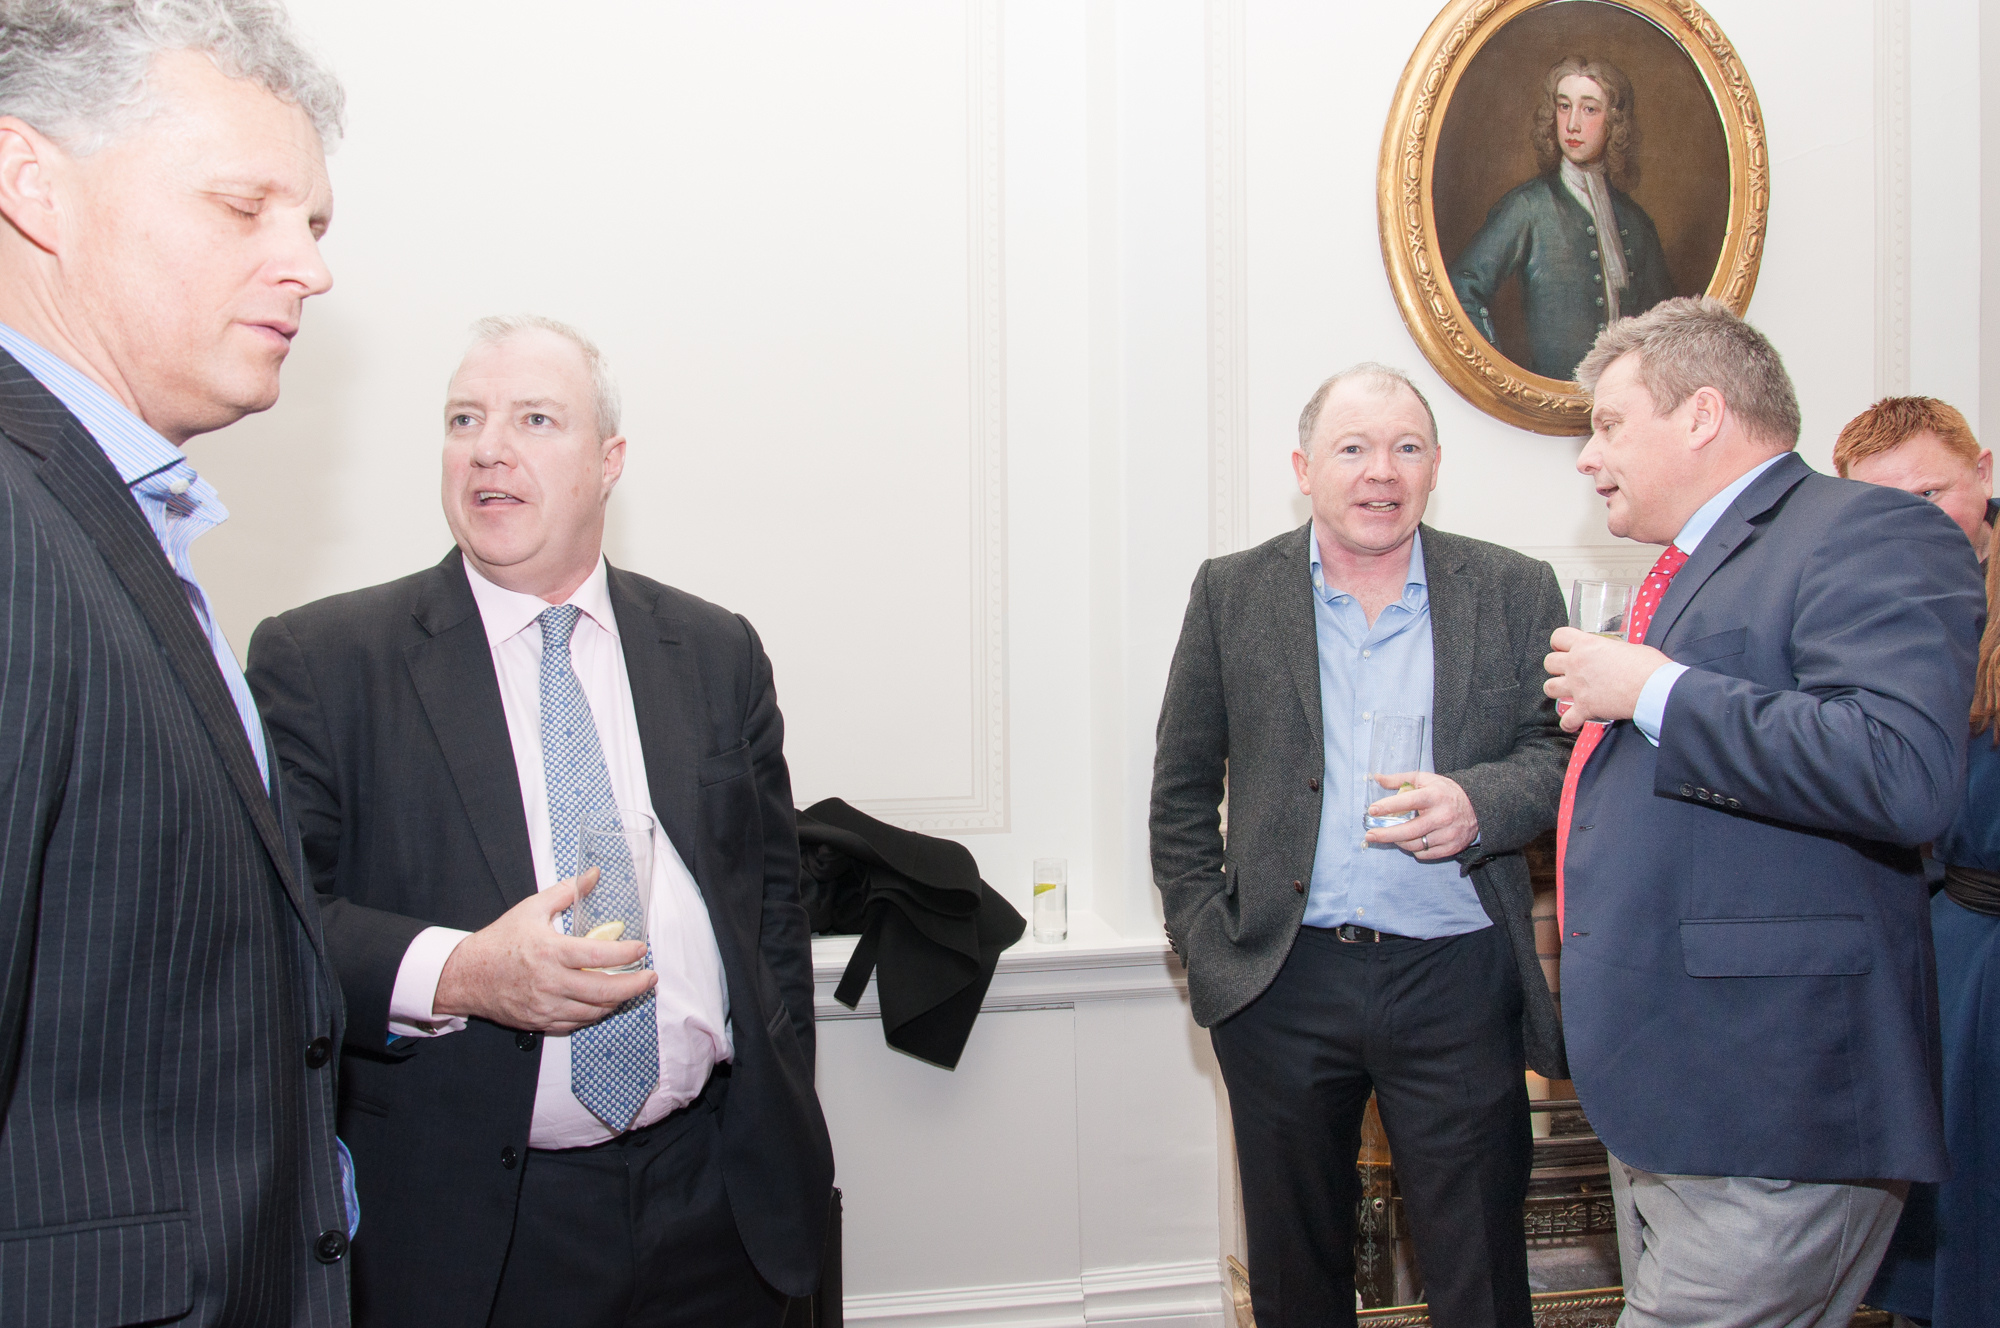 St Gerard's School Past Pupils Union Lunch at Shelbourne Hotel by Natalia Marzec_ low res112